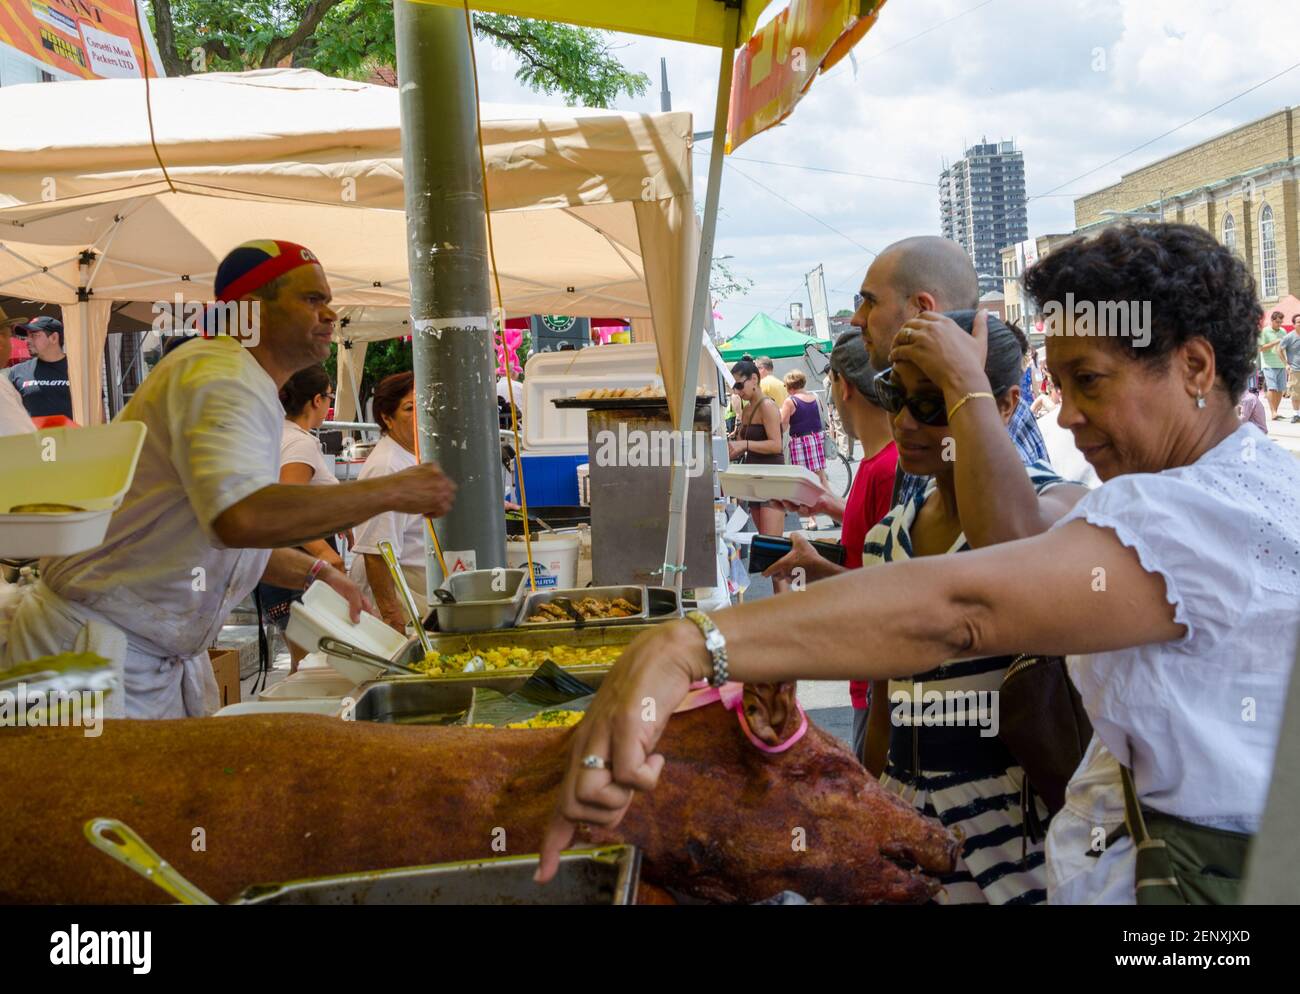 Salsa on St. Saint Clair Festival Scenes: People at an outdoor food stand look over the serving trays to decide what they want to eat. The lady in the Stock Photo